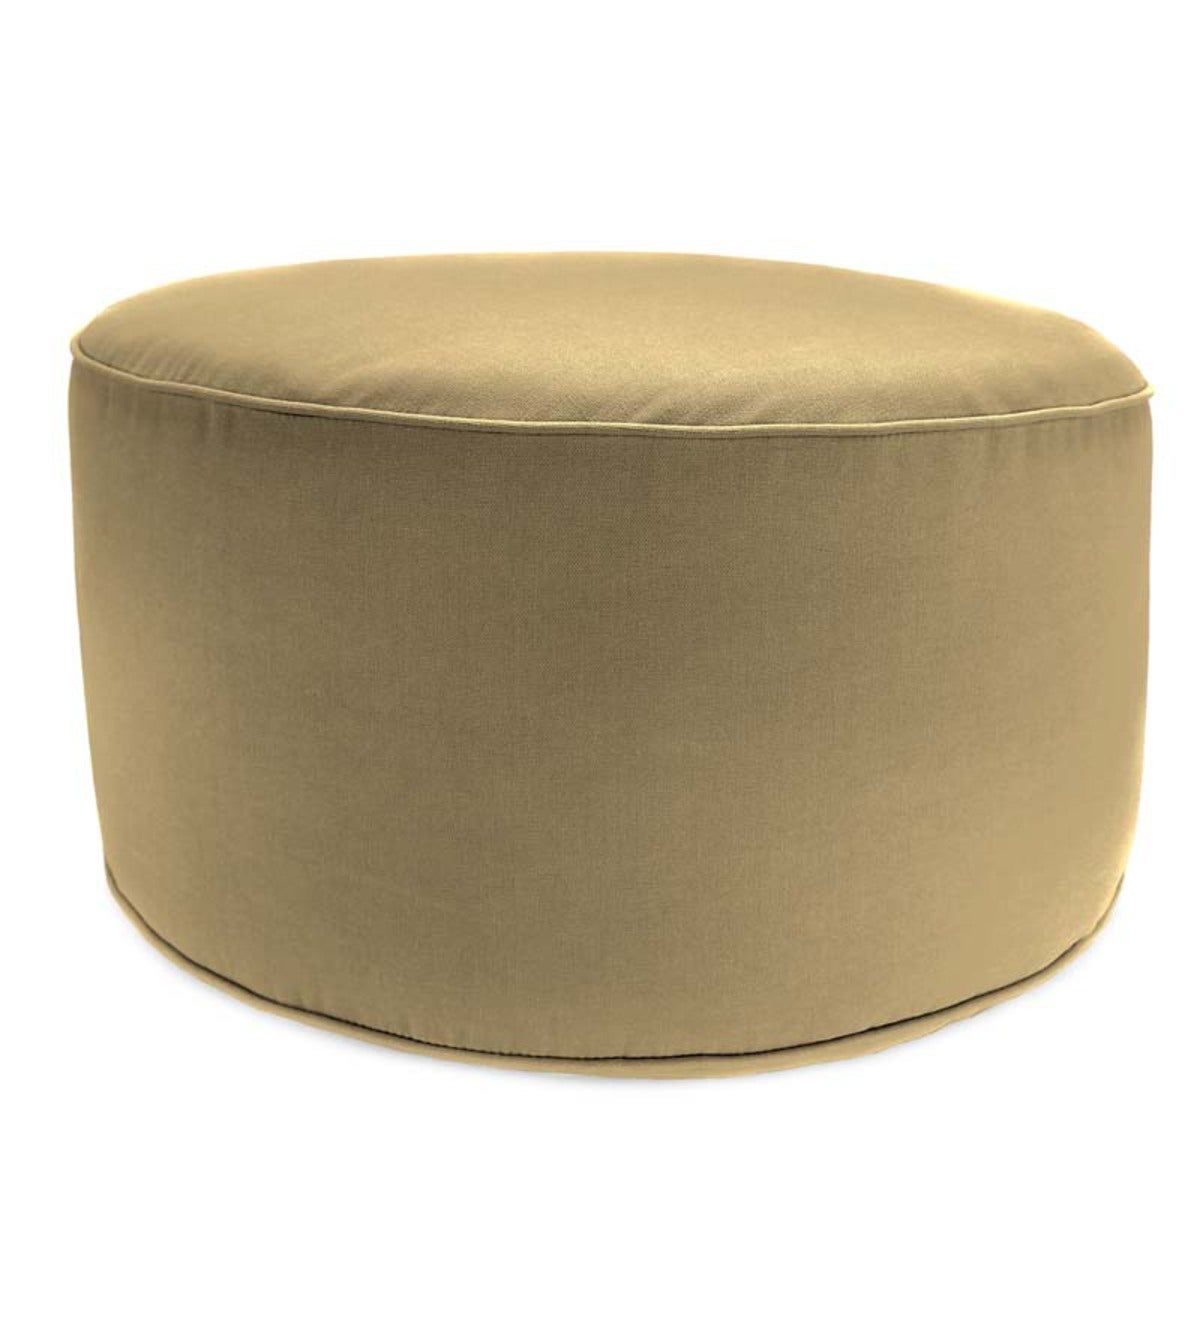 Round Sunbrella™ Deluxe Outdoor Pouf Ottoman – Forest Green | Plowhearth For Textured Green Round Pouf Ottomans (View 1 of 20)